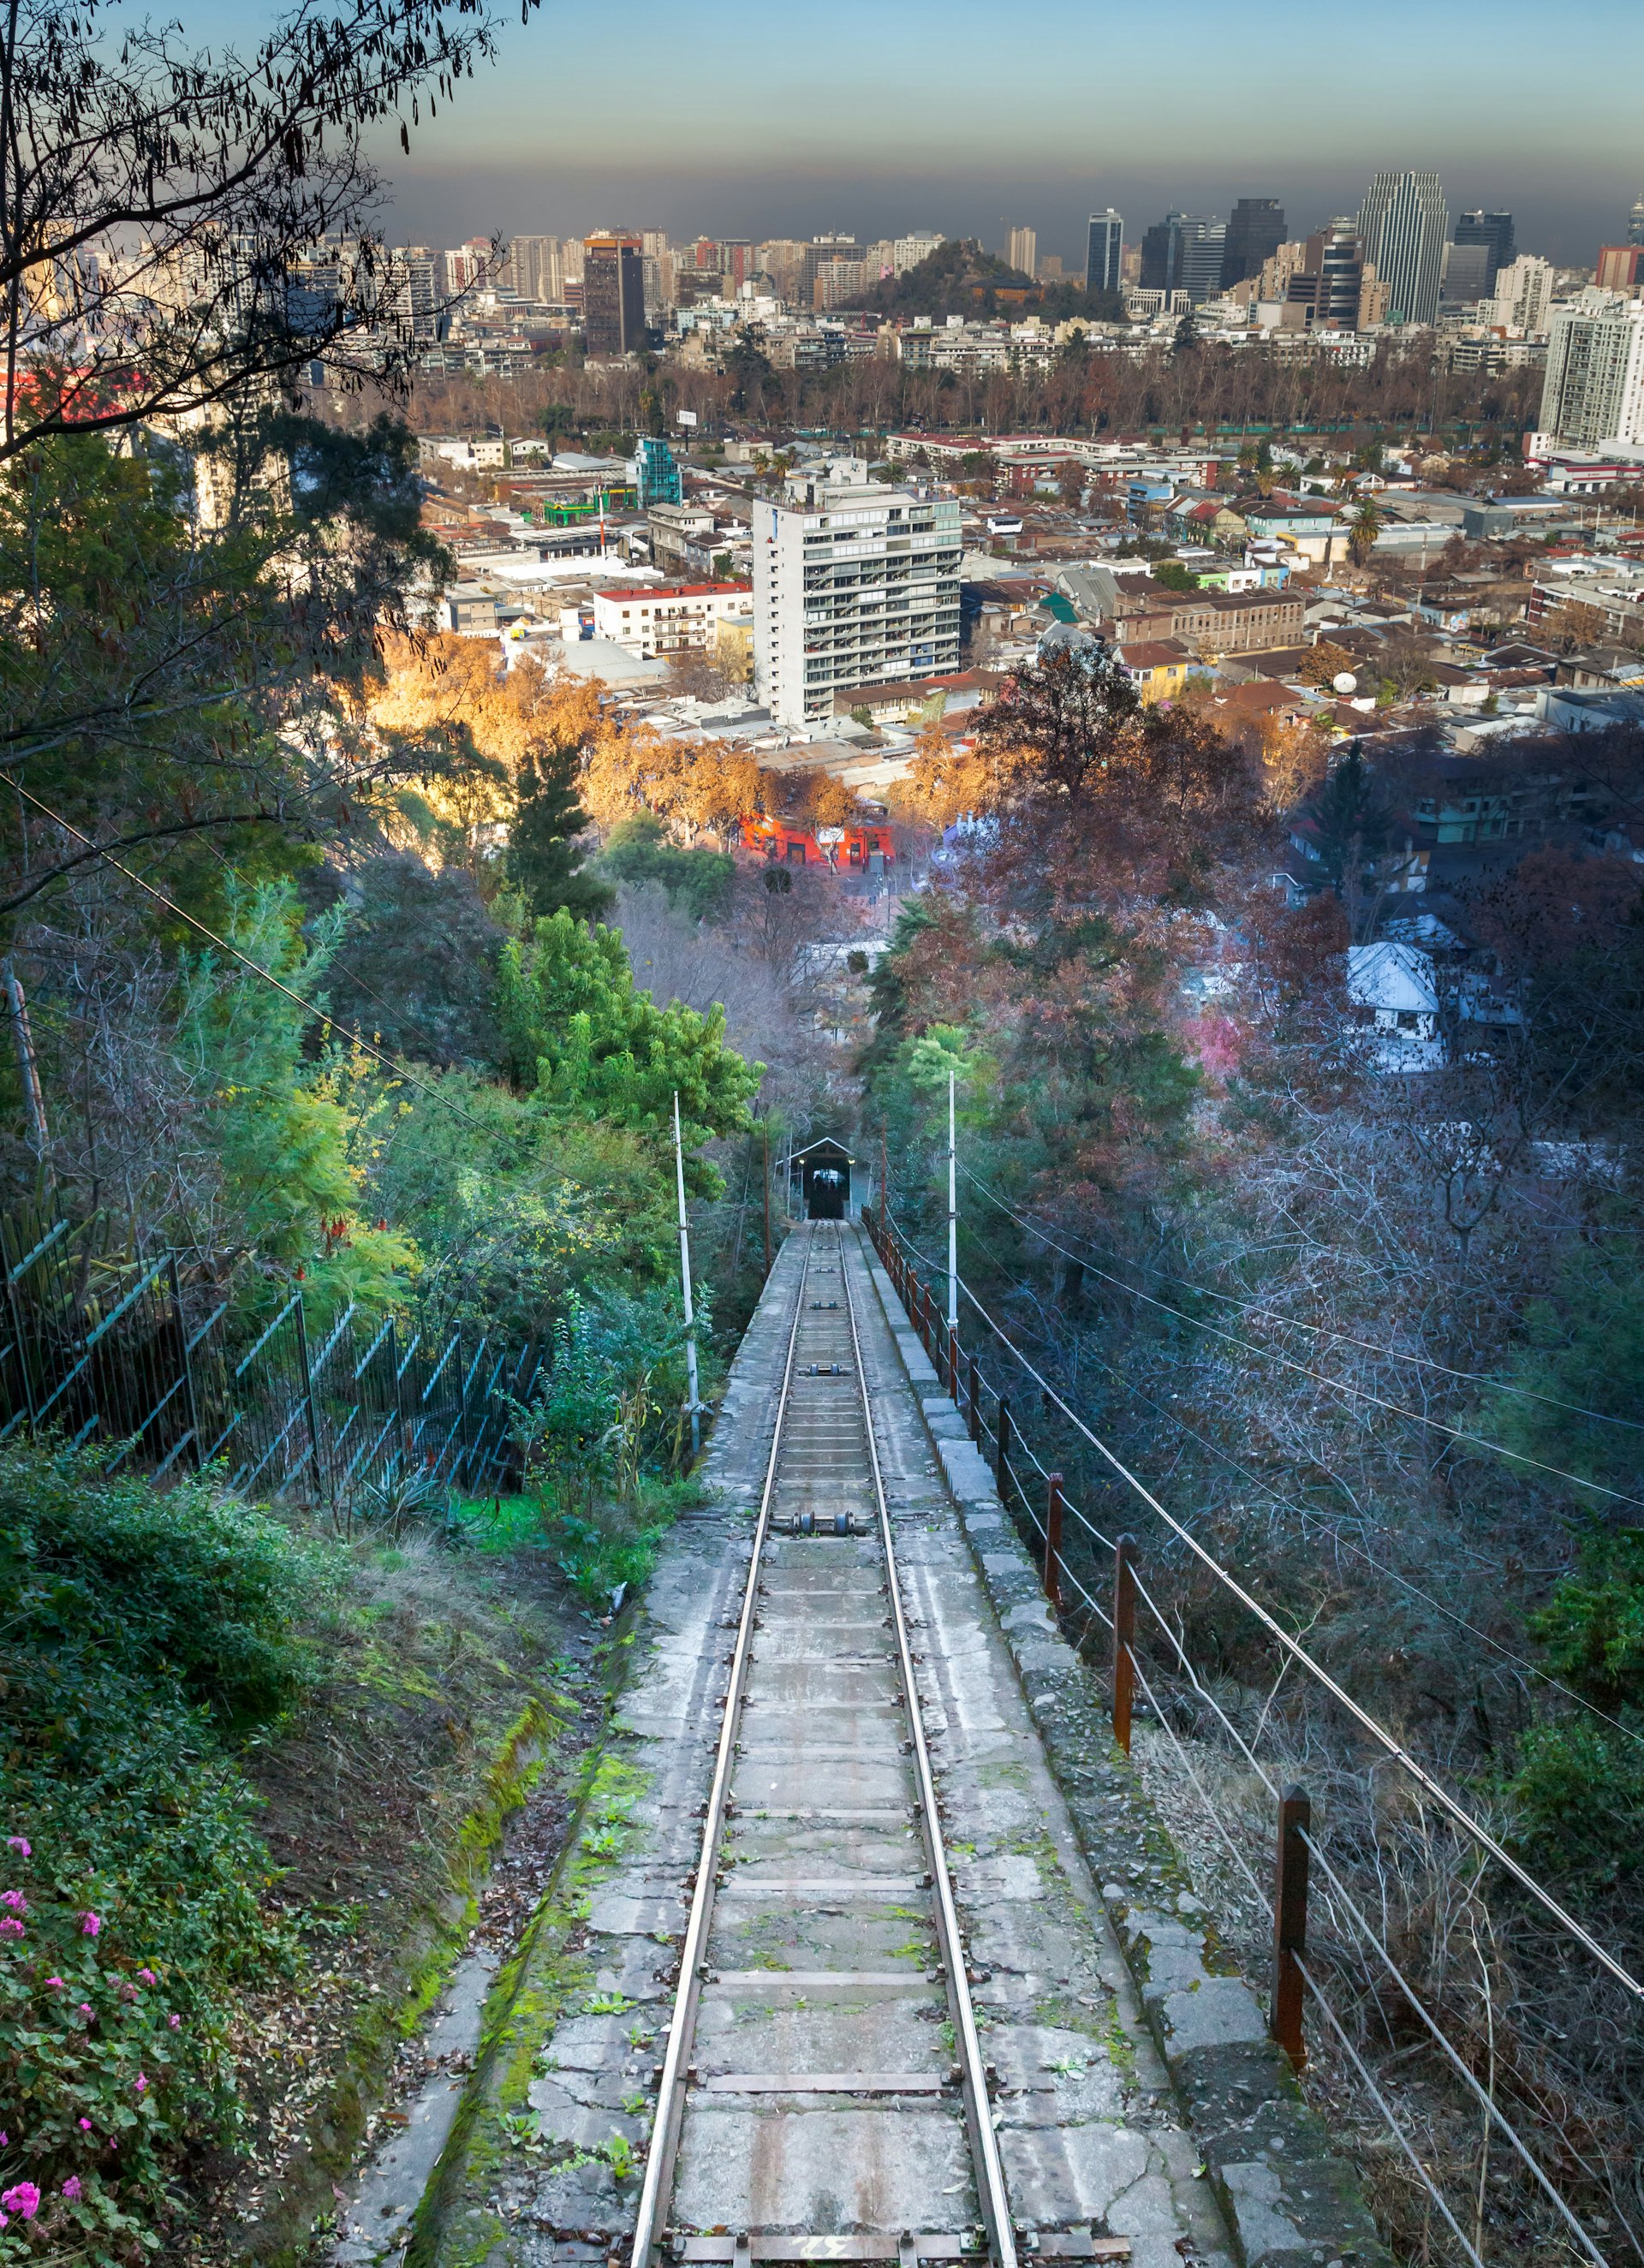 A tram line cuts down through the woods at the top of San Cristobal hill in Santiago, Chile, which spreads out in the background.